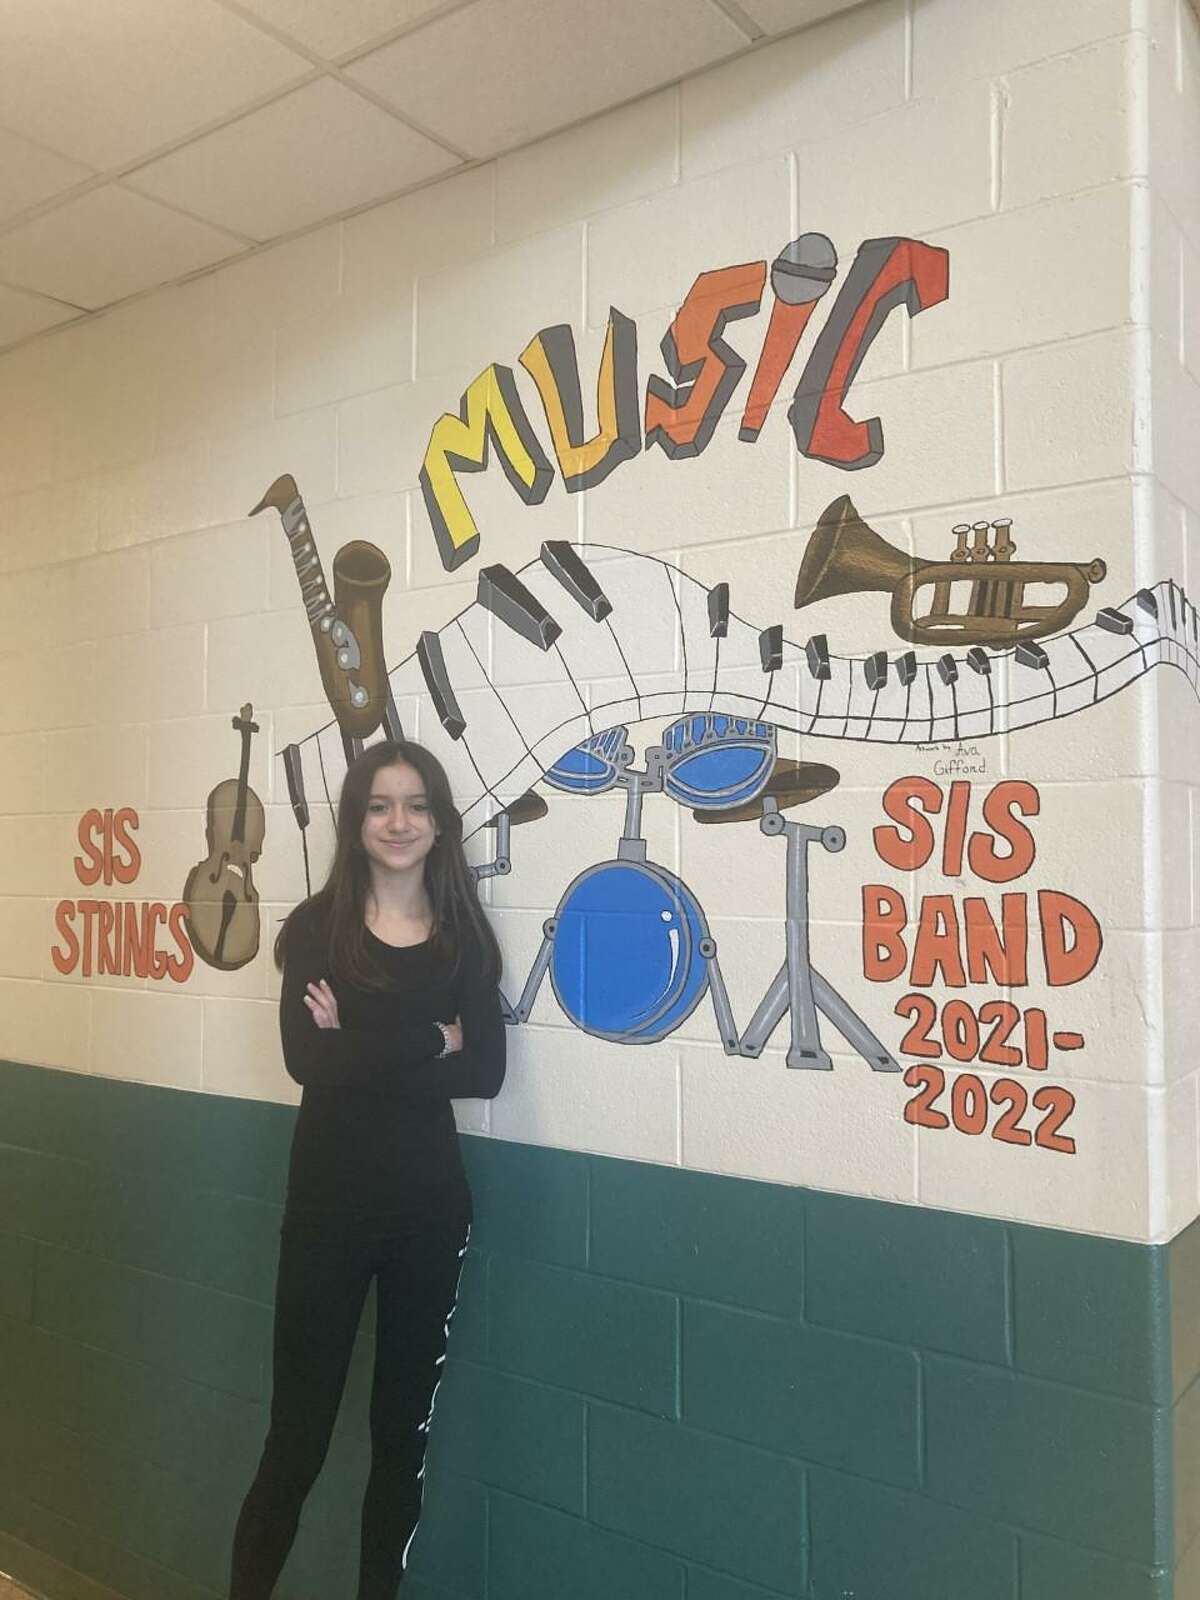 Shelton Intermediate School student Ava Gifford’s mural design was selected from among 40 entries submitted this past winter by art and music students. Her mural was painted on the walls entering the music section of the school.